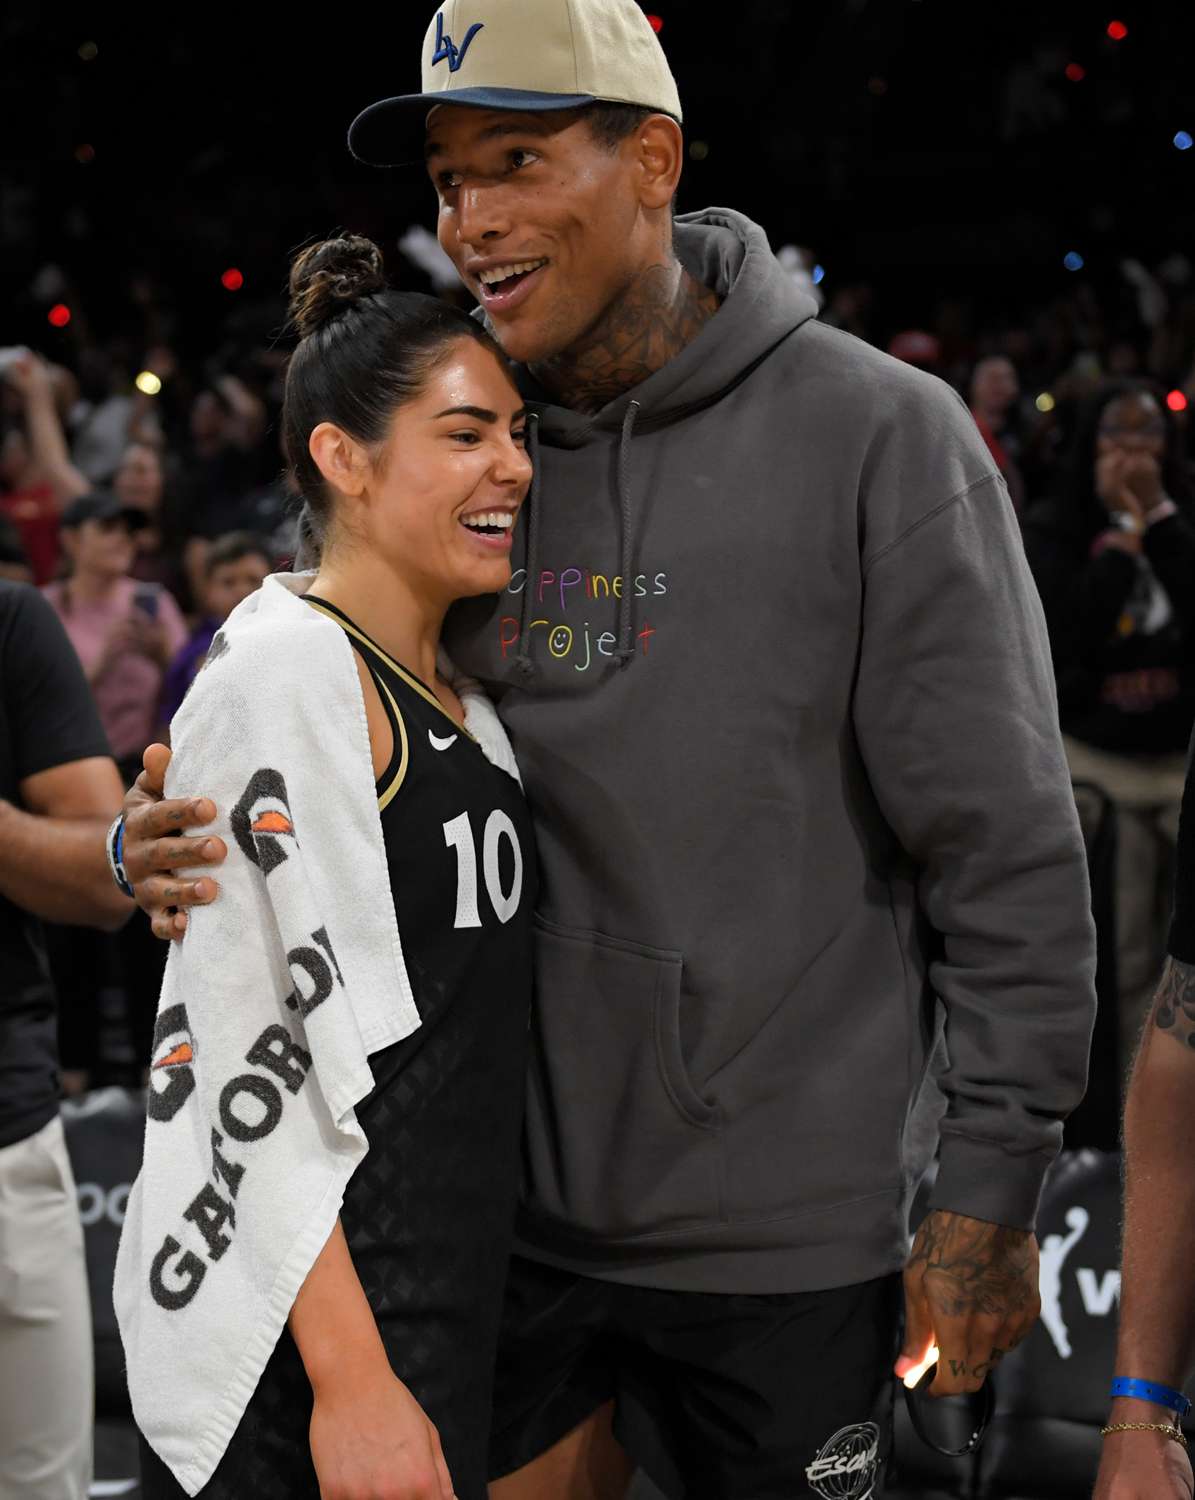 NFL player, Darren Waller embraces Kelsey Plum #10 of the Las Vegas Aces after Round 1 Game 1 of the 2022 WNBA Playoffs on August 17, 2022 at Michelob ULTRA Arena in Las Vegas, Nevada. 